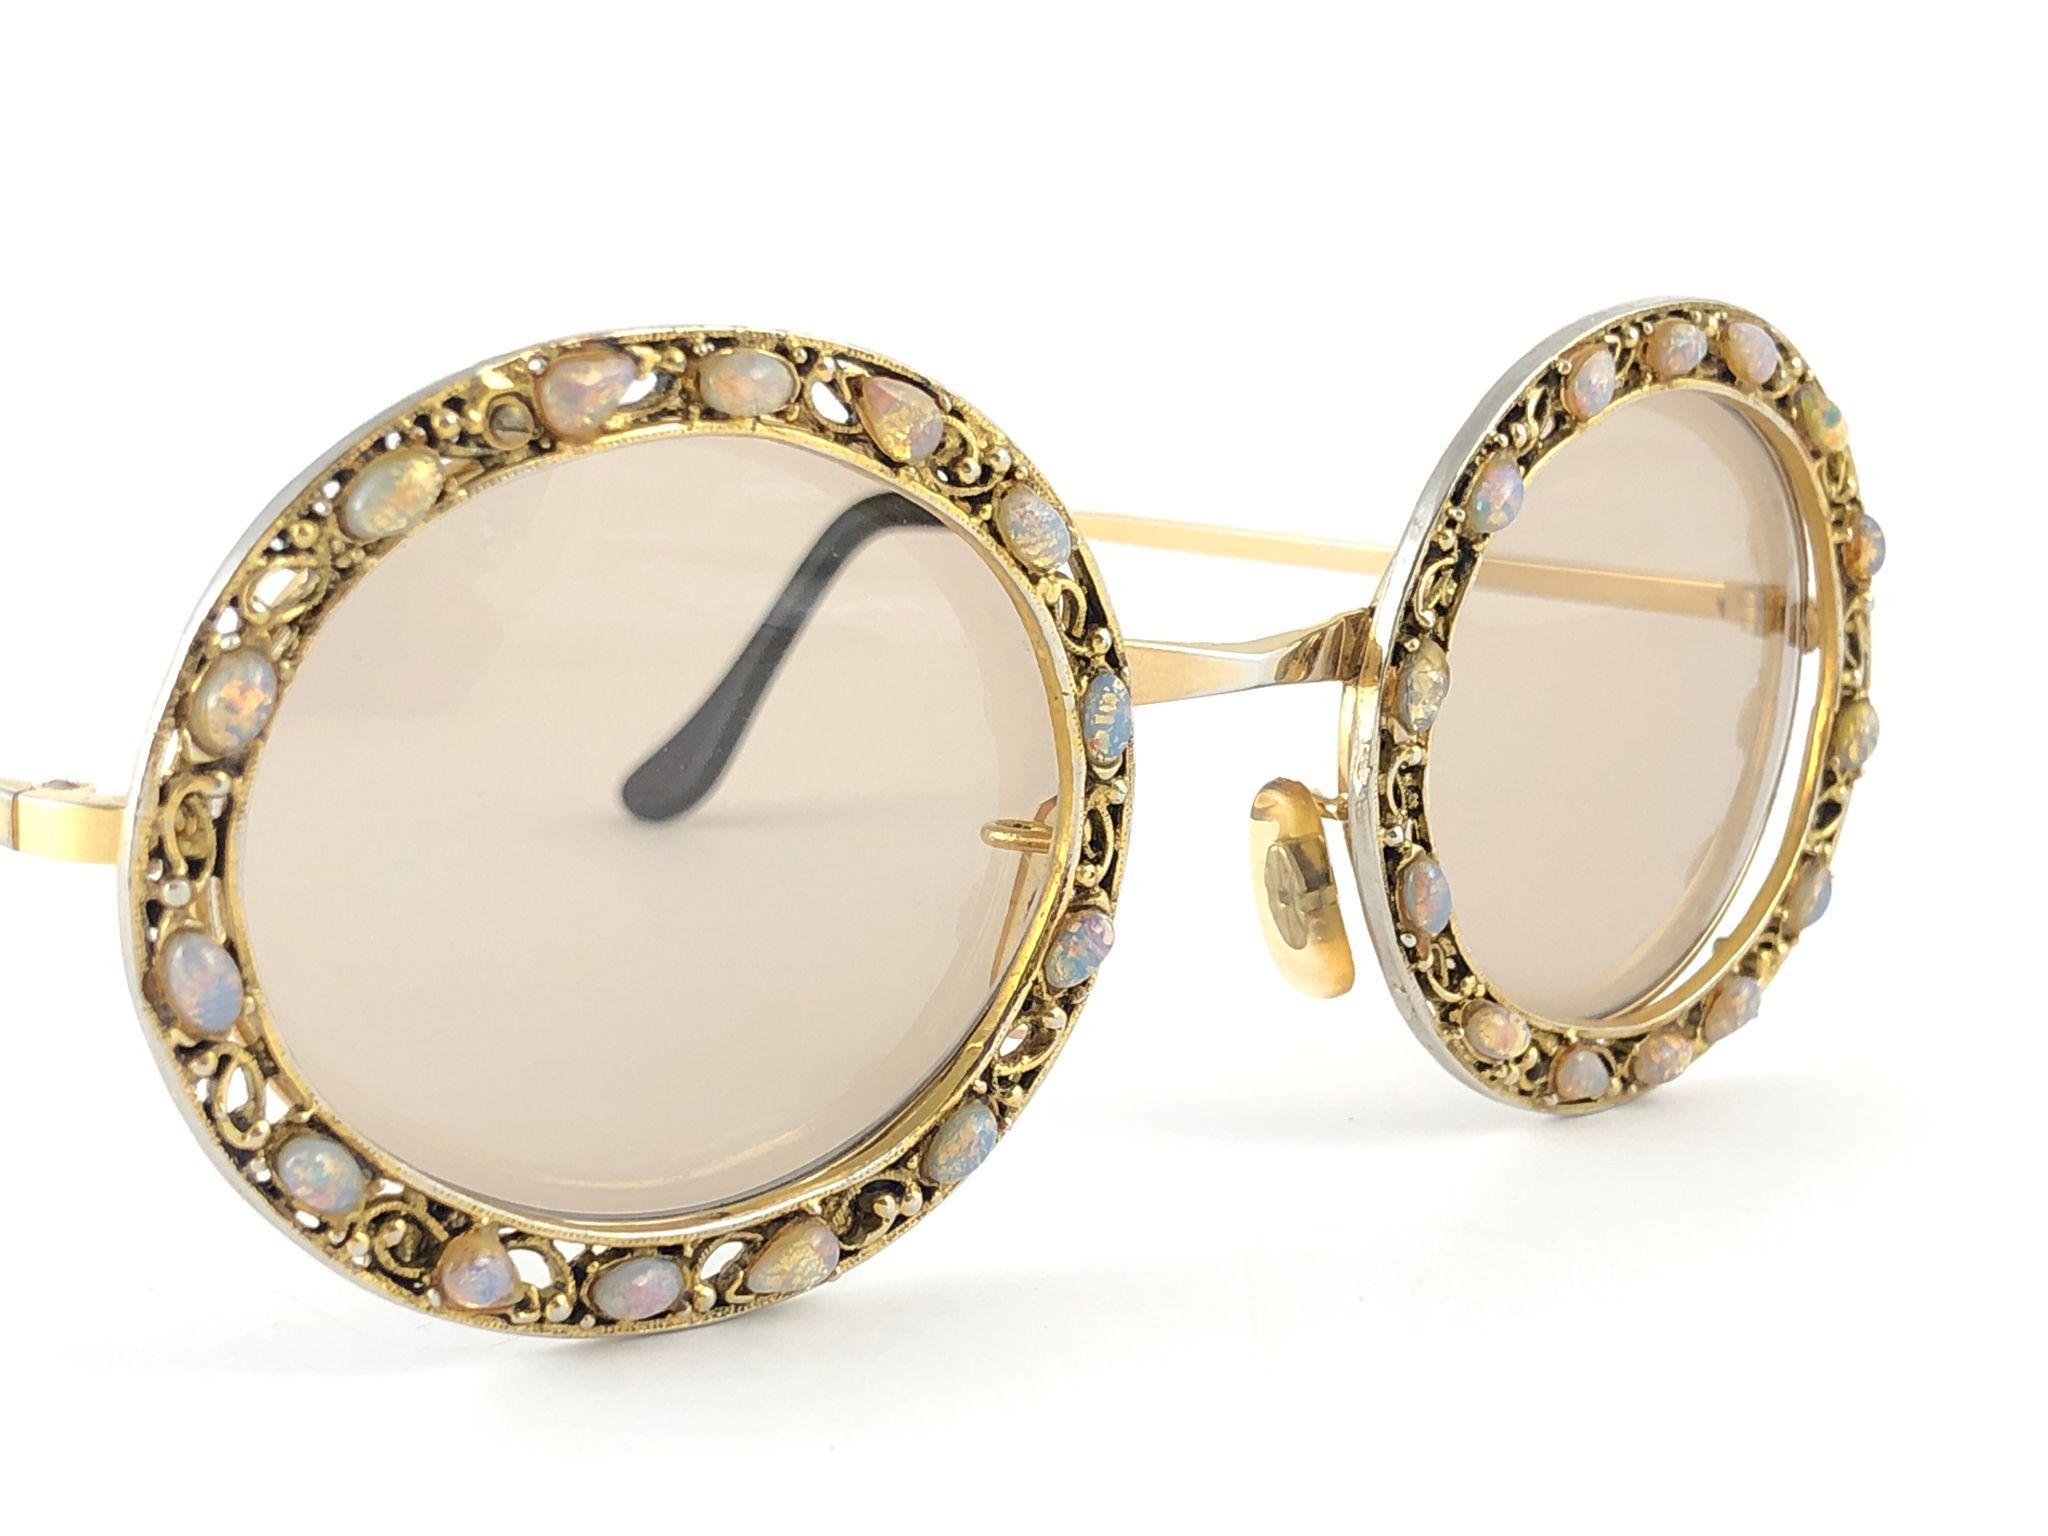 Ultra Rare 1960 Tura Jewelled Opal Accented Frame Archive Dior Sunglasses For Sale 3